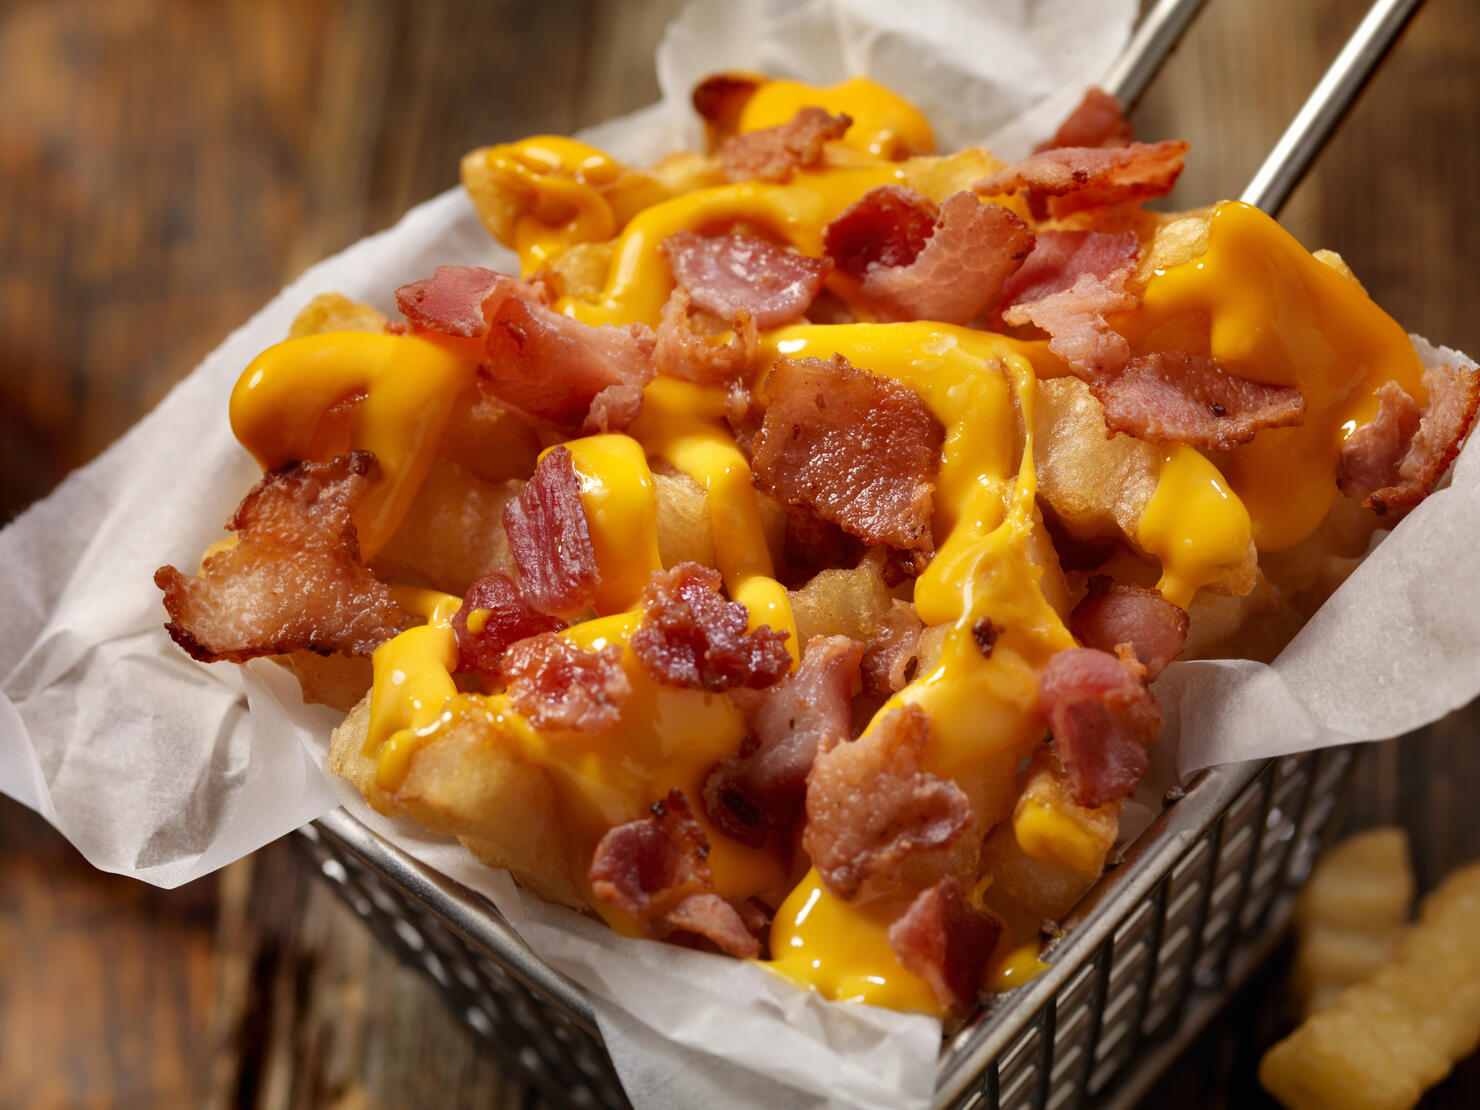 Basket of Bacon Cheesy Crinkle Cut French Fries